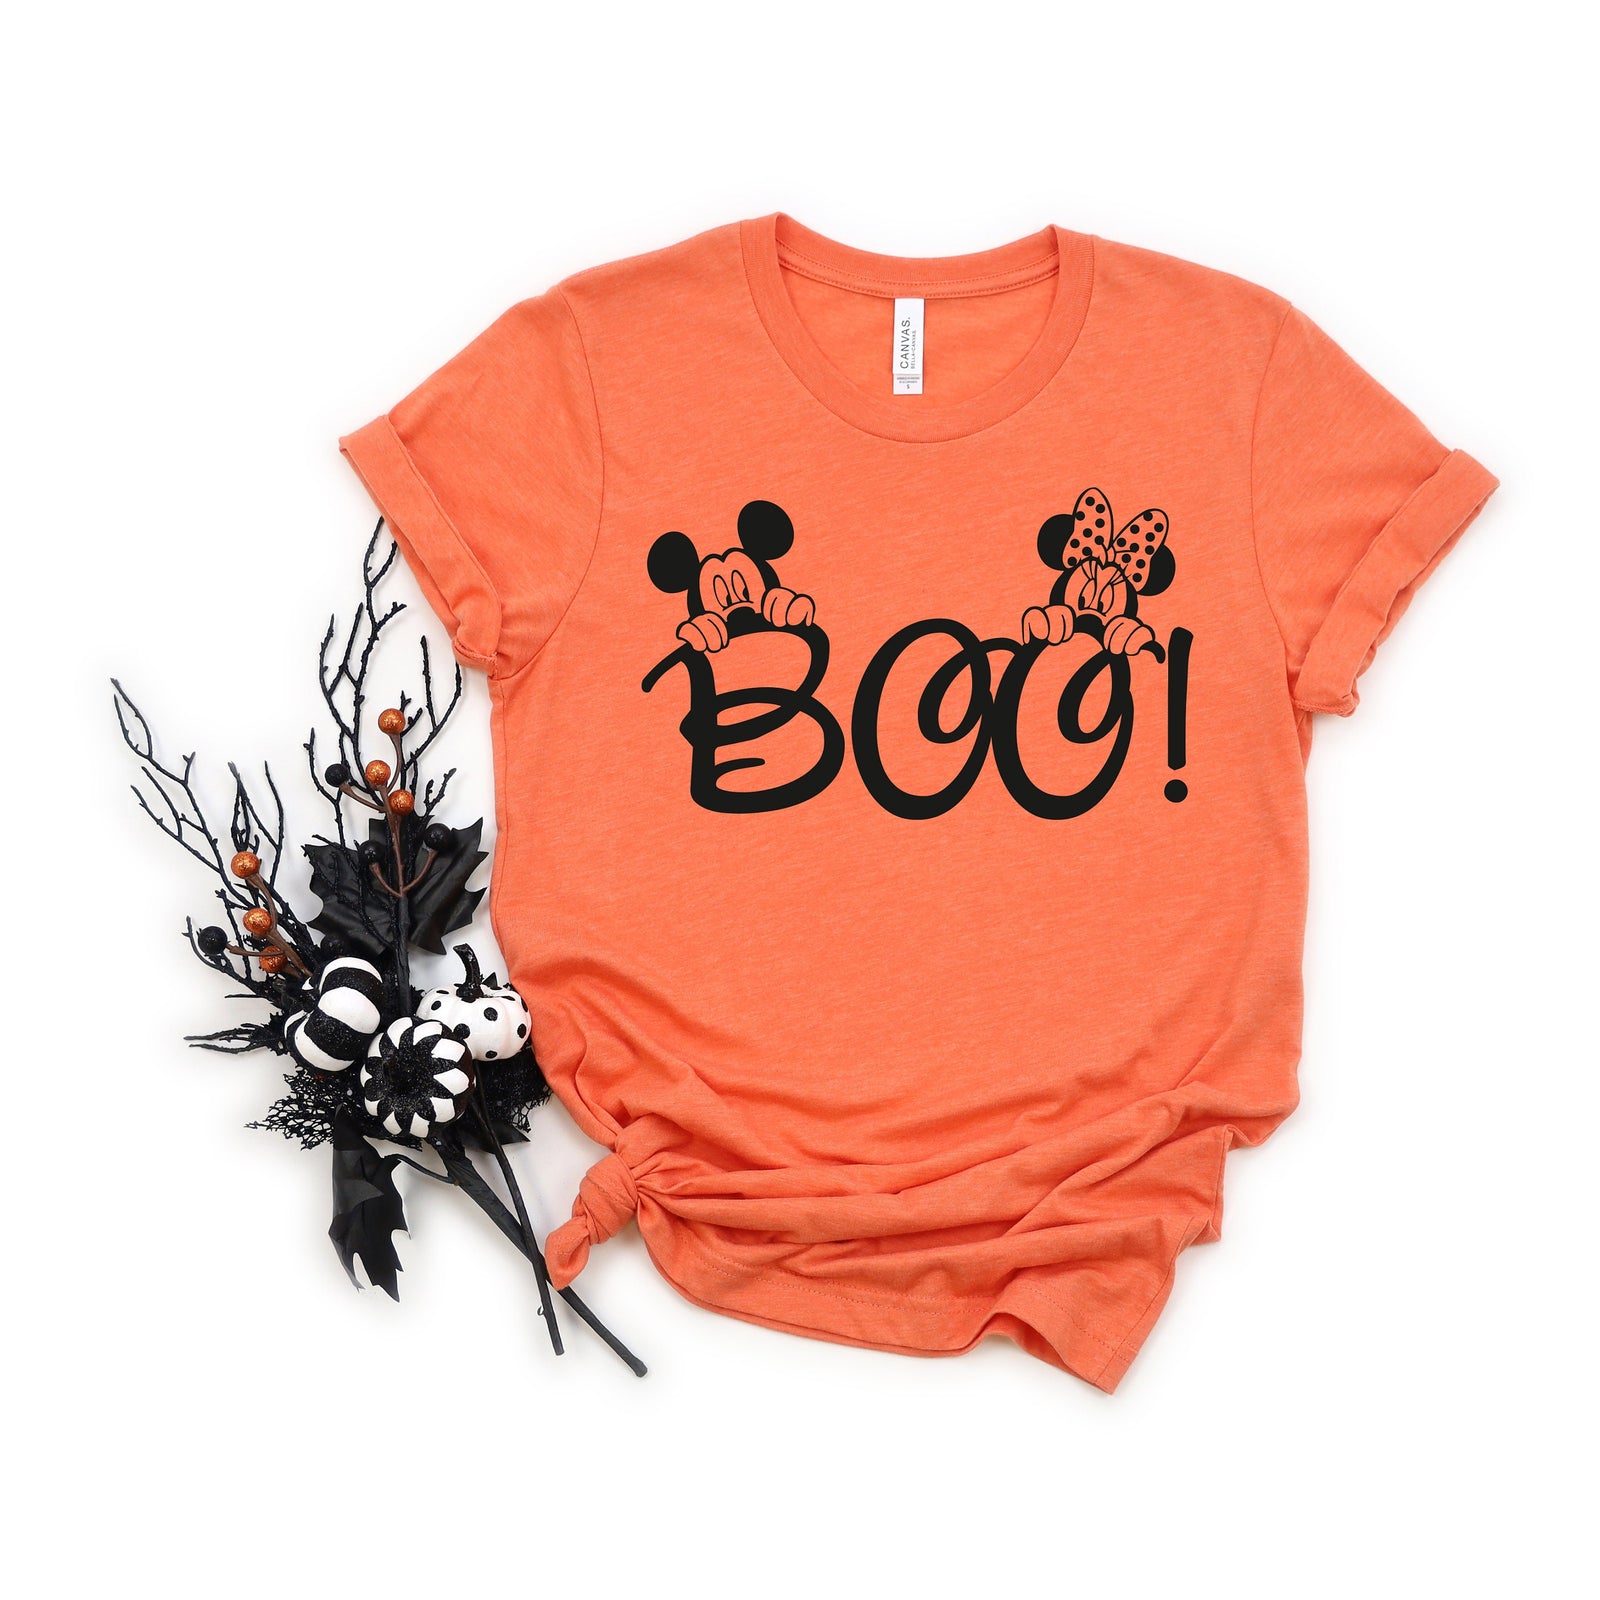 Disney Mickey and Minnie Mouse Boo Adult T Shirt - Halloween - Not So Scary Ghosts - Matching Shirts